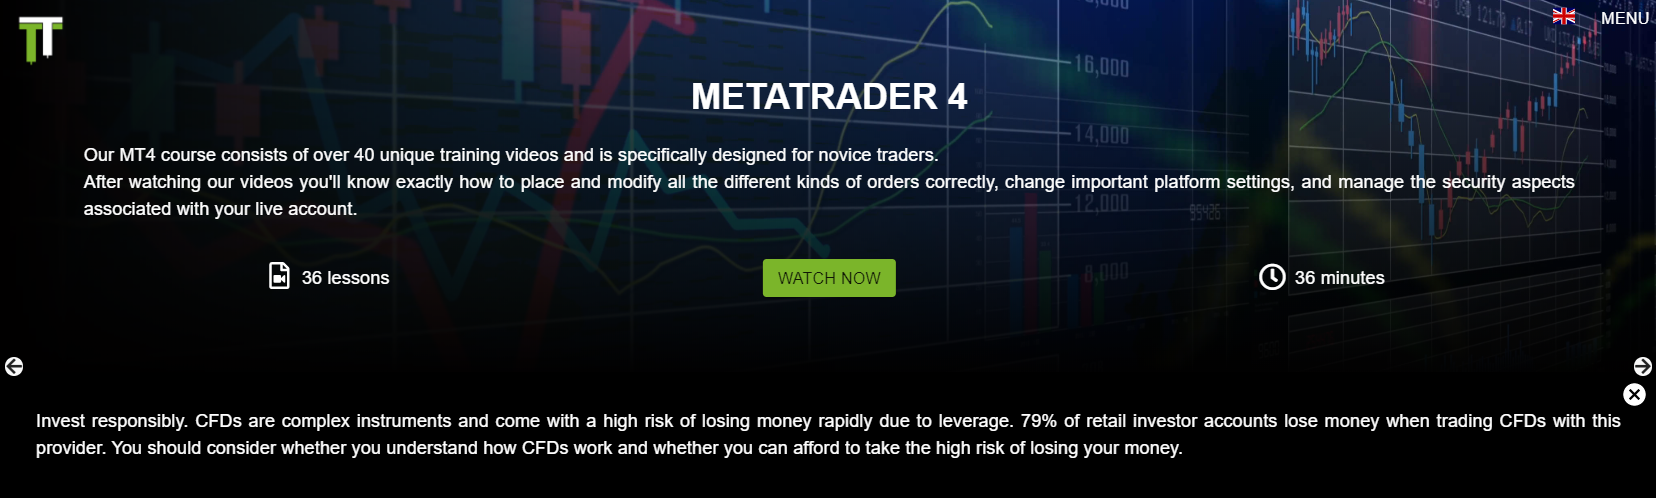 This tab contains videos teaching how the MetaTrader platform works